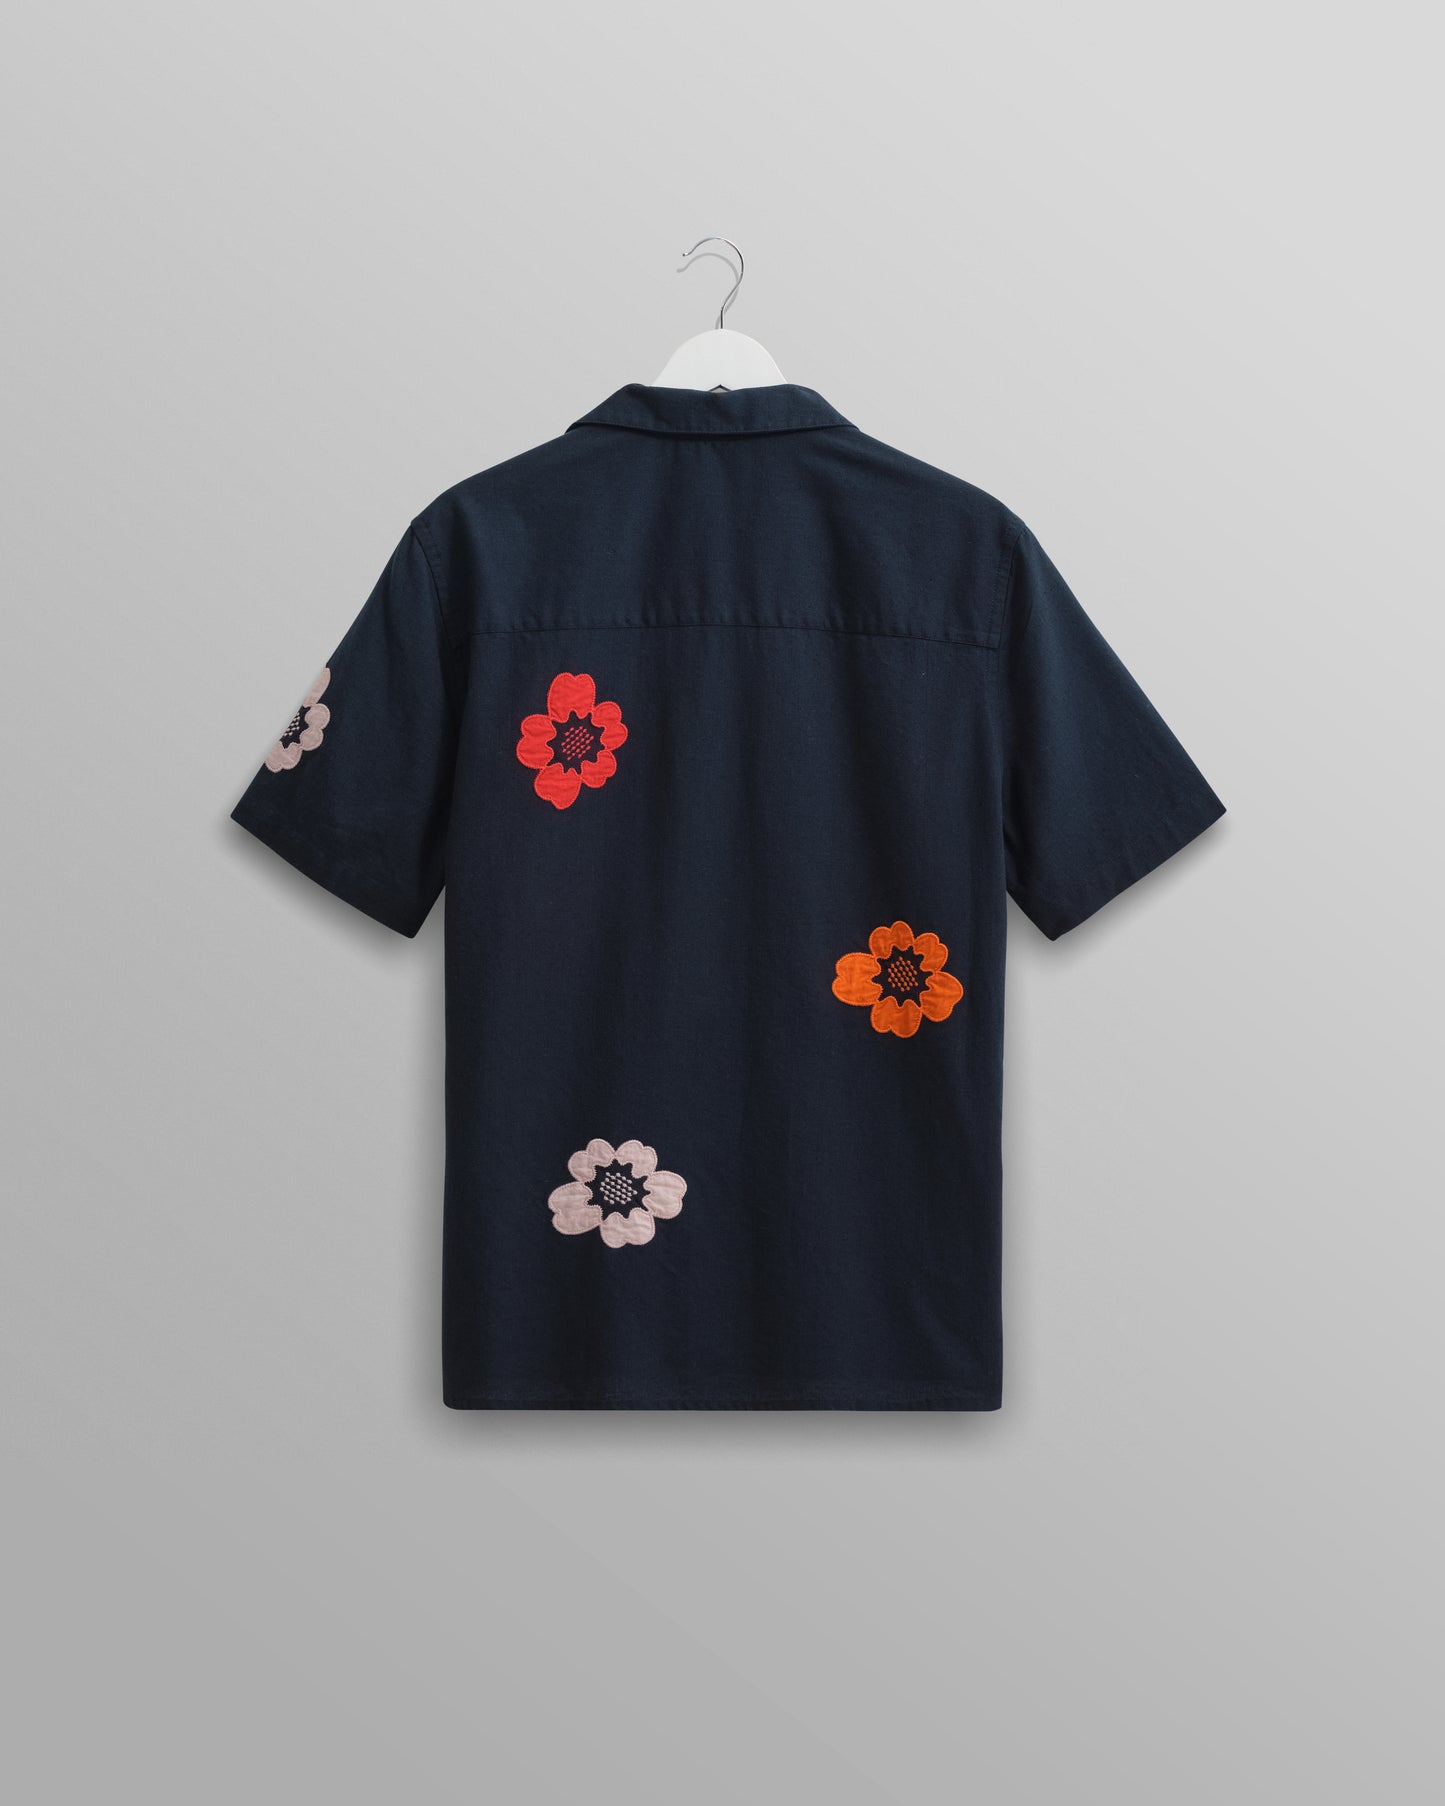 Didcot SS Floral Applique Navy